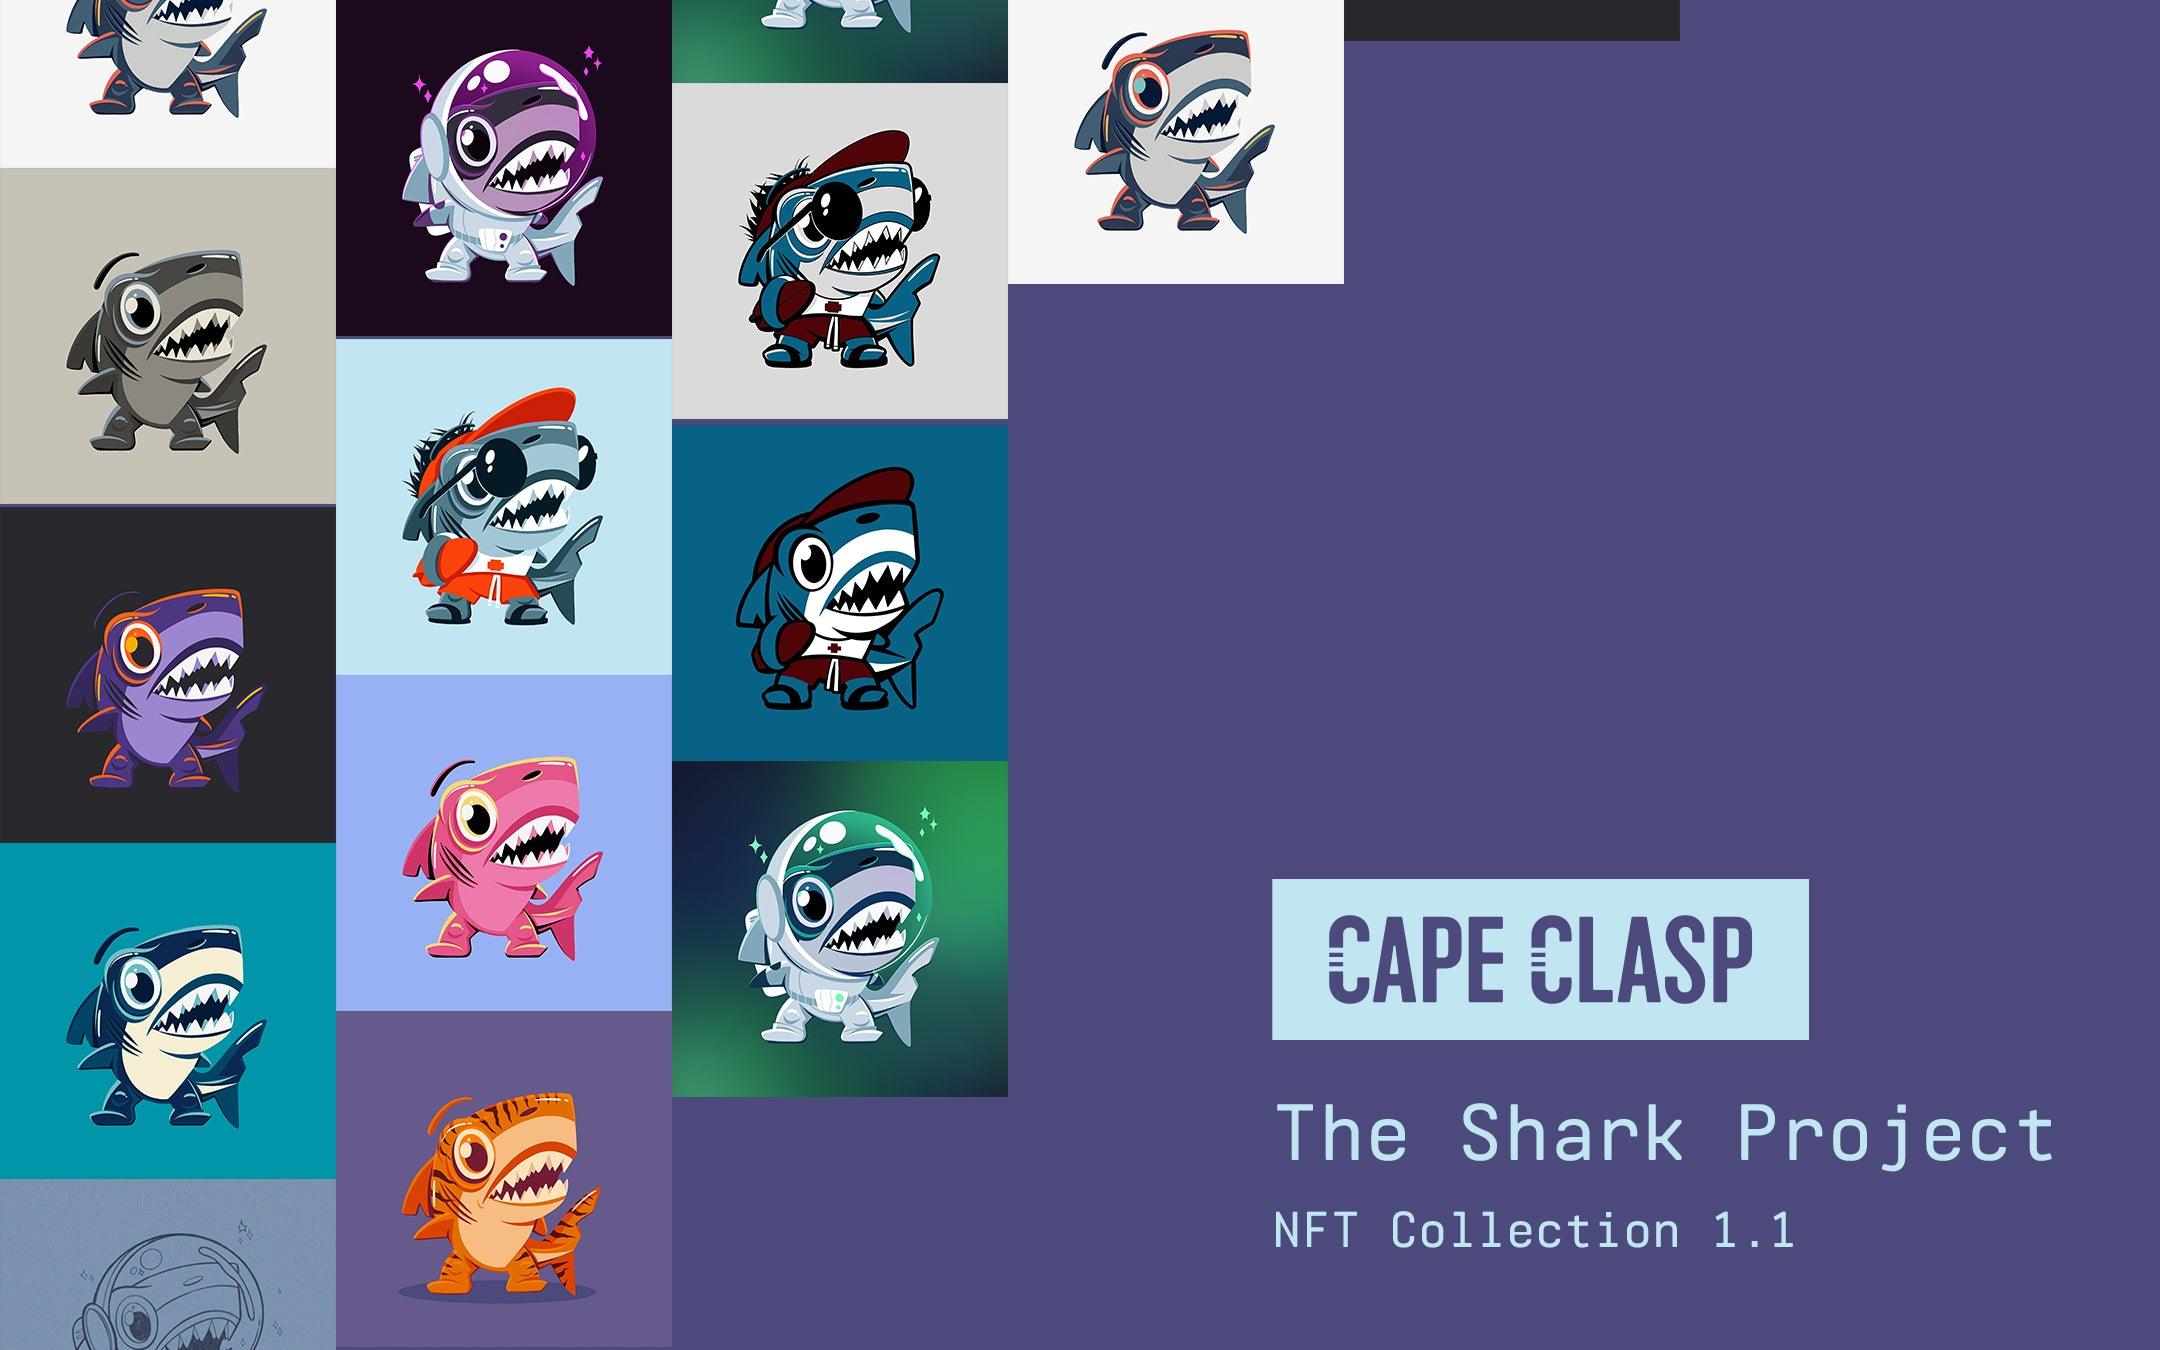 The NFT Shark Project - Cape Clasp